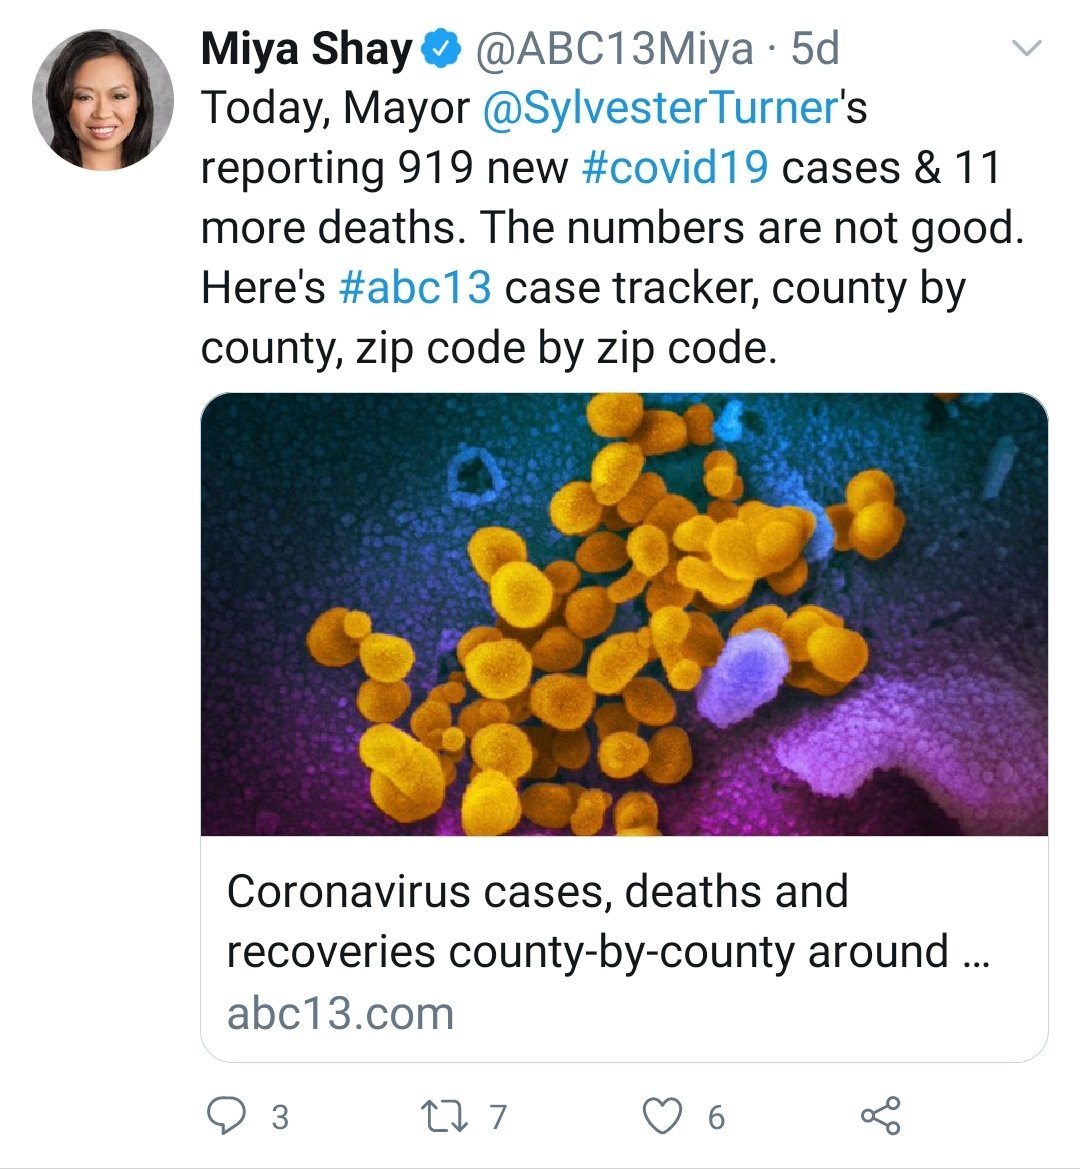 Here are several more examples of Shay hyping the Virus in her reporting.The weird thing is, I wasn't able to find a single tweet from Shay condemning that China lied about the virus or that they were responsible for the global outbreak.Hmm.. Why is that? 